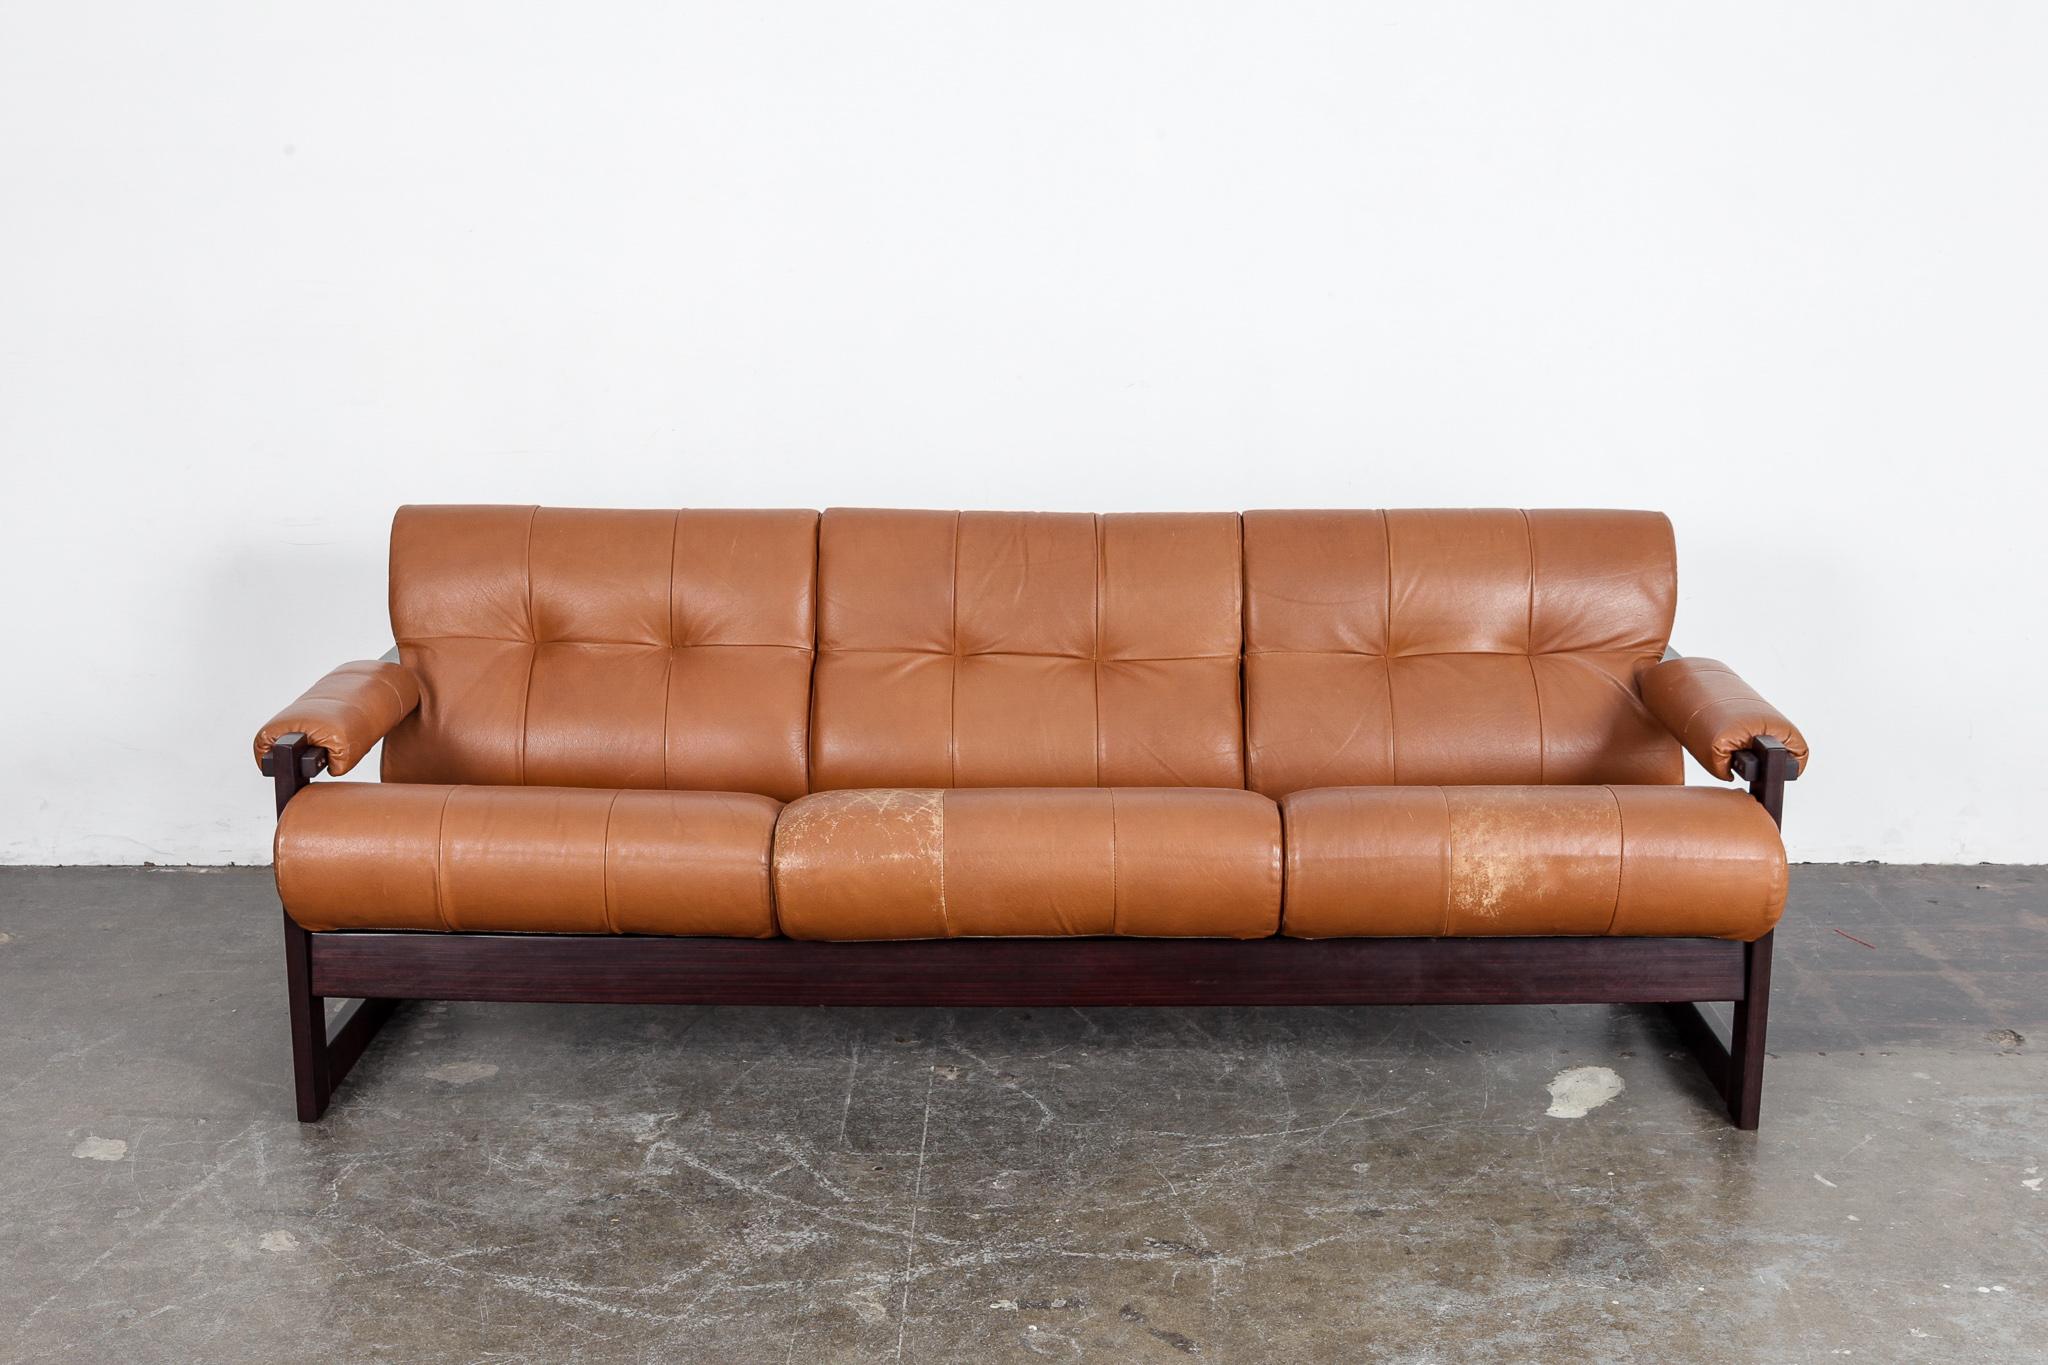 Percival Lafer designed 3-seat tufted sofa in original burnt orange leather with jatoba wood frame, model MP-167, produced by Lafer MP, Brazil, 1960s. Leather shows some patina and wear, consistent with age, especially on 2 of the seat cushions as